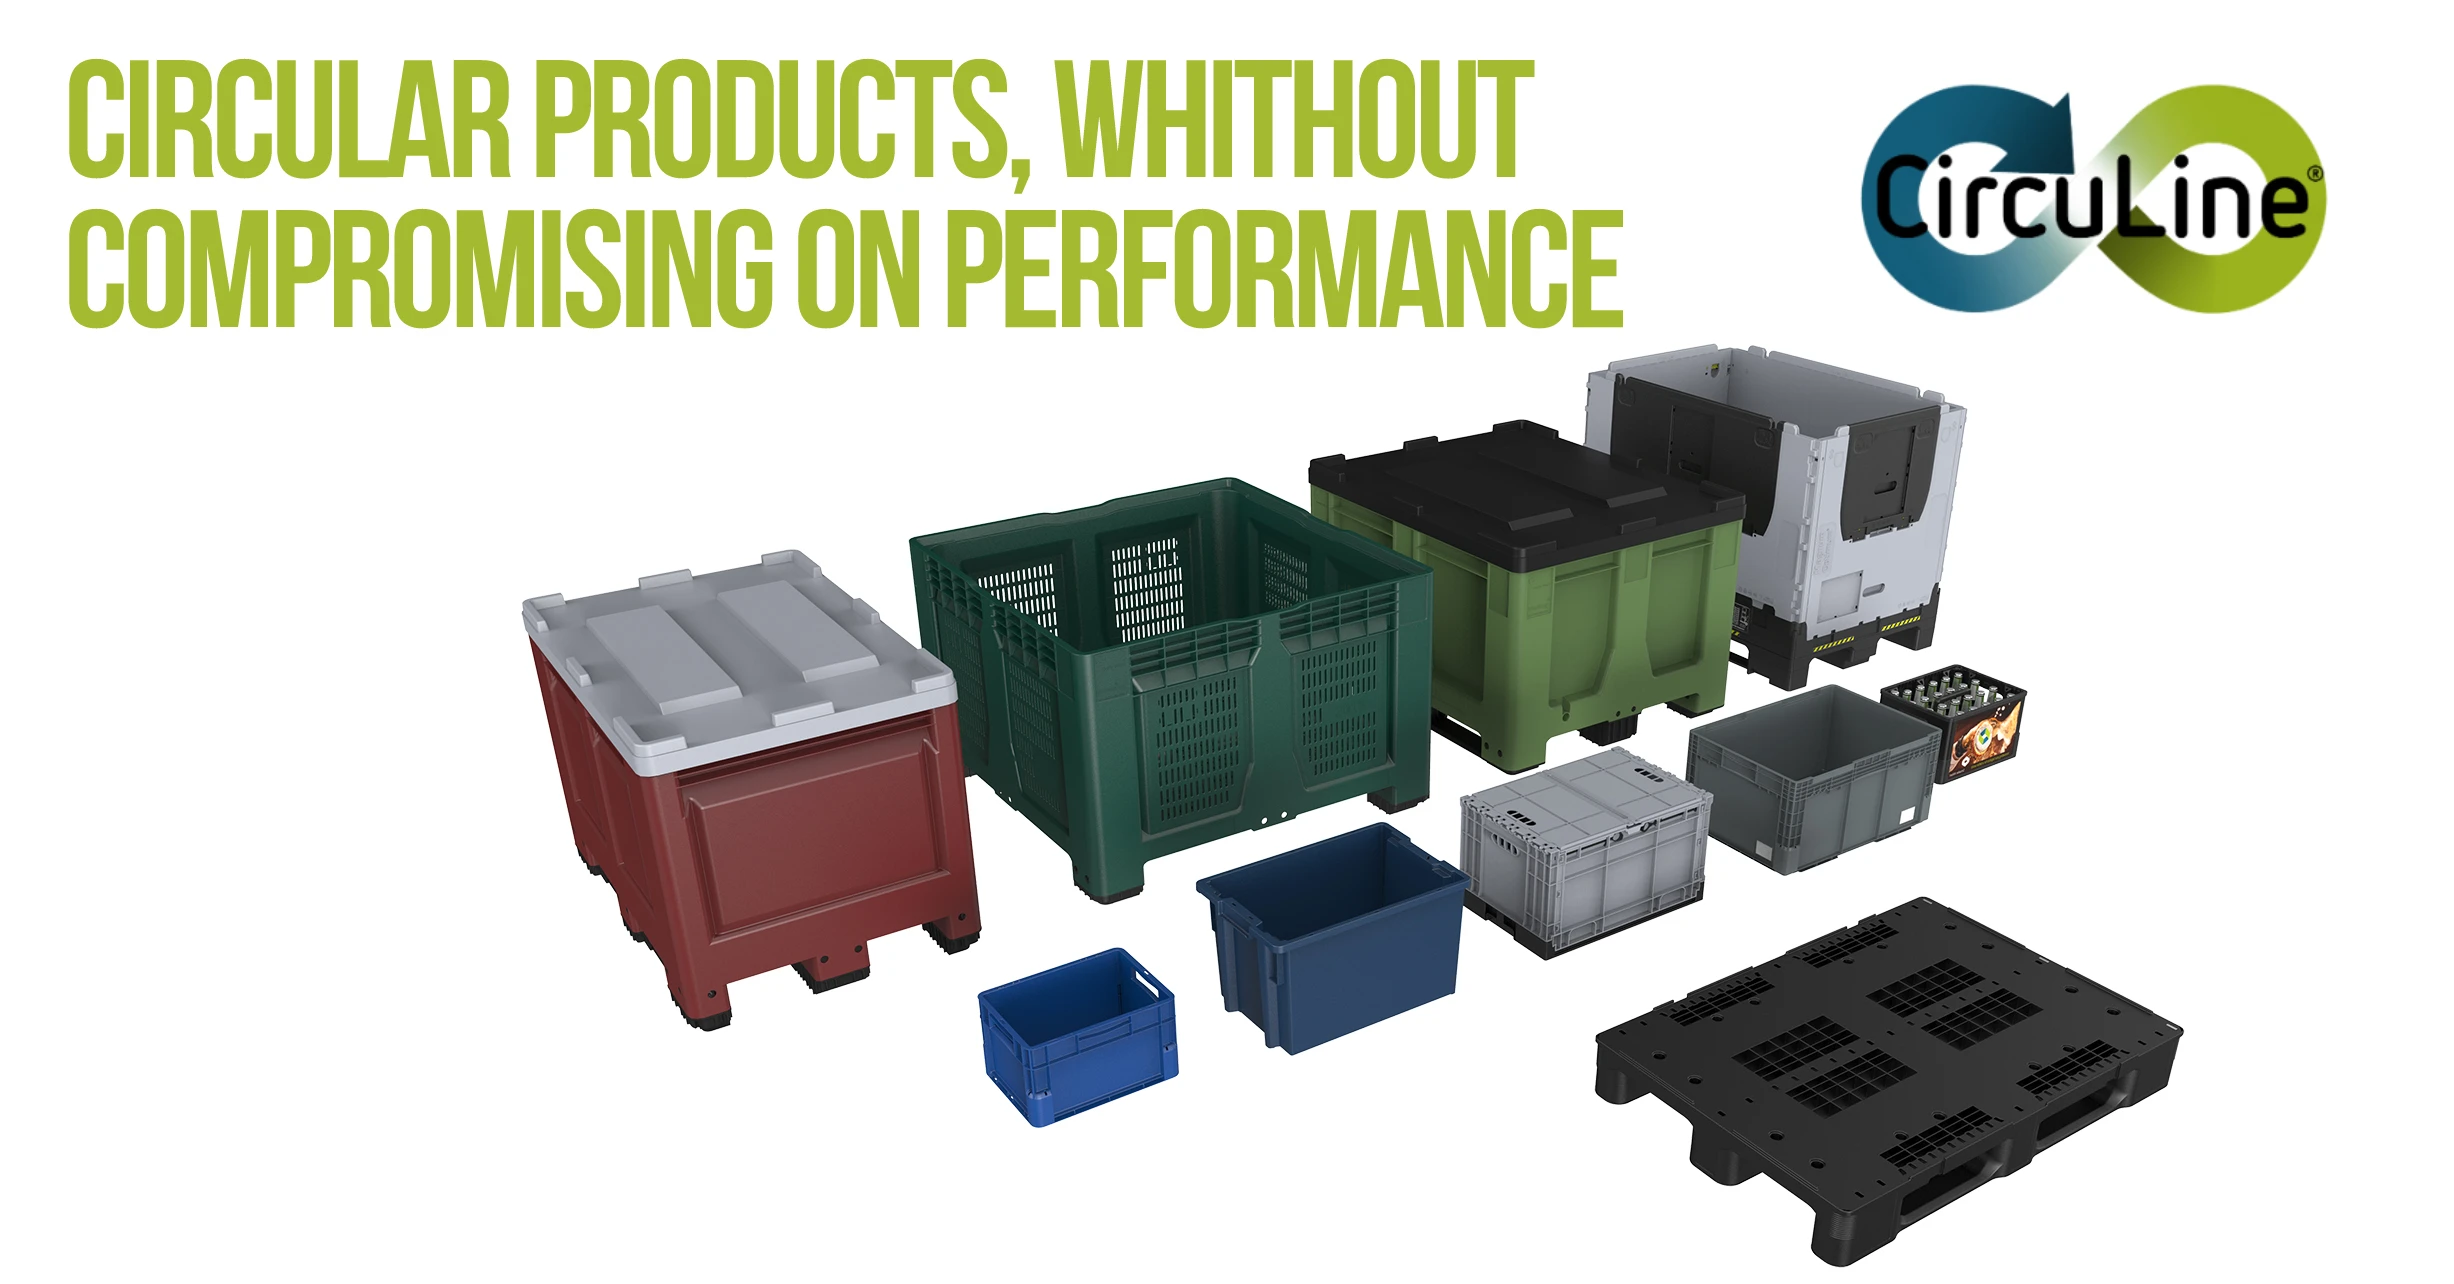 Circular products, without compromising on performance